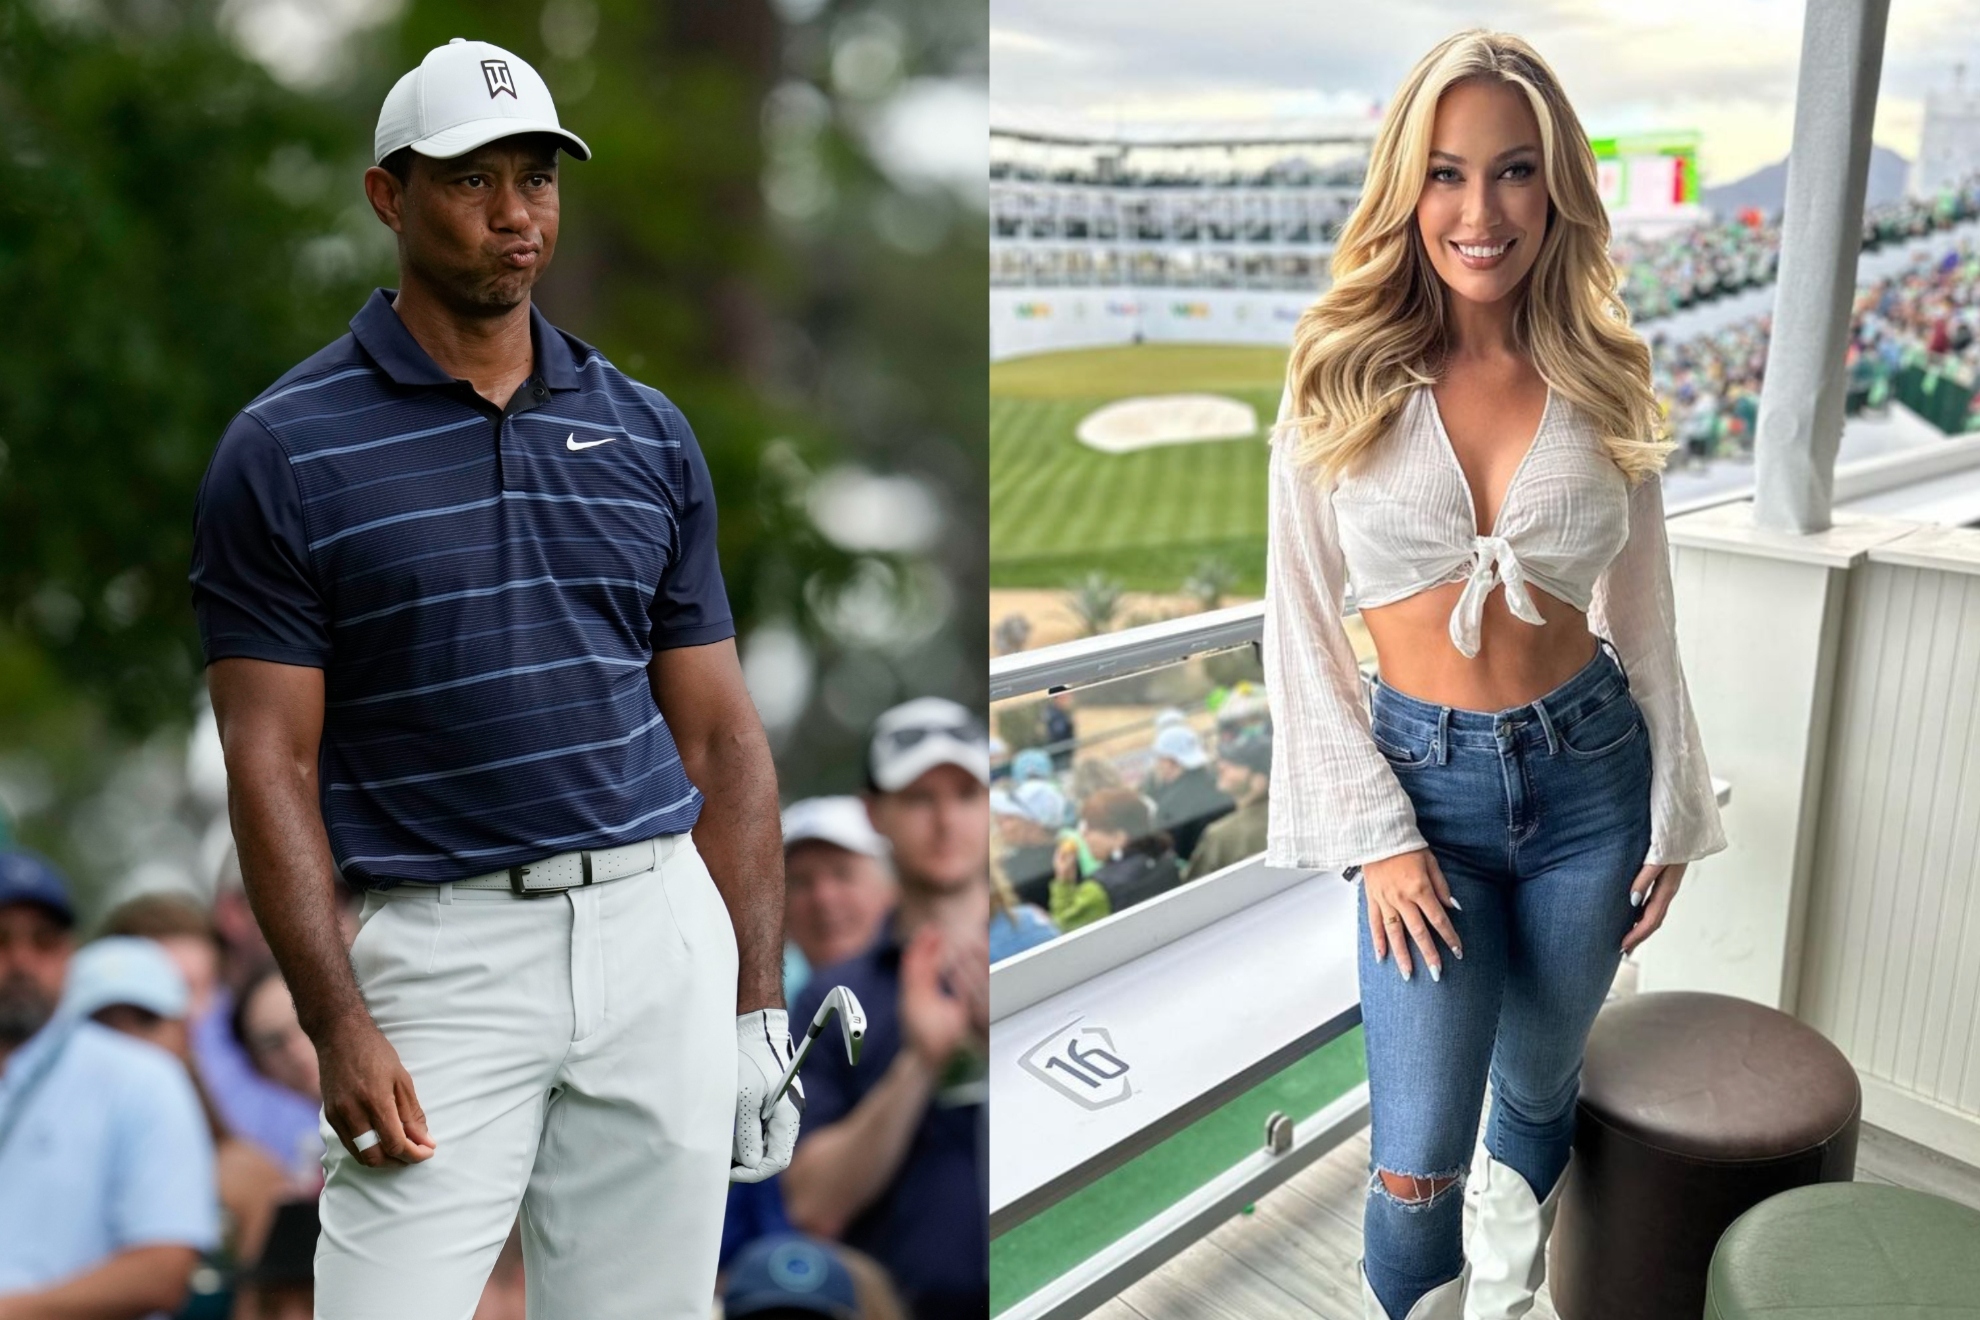 Mashup image of Paige Spiranac and Tiger Woods